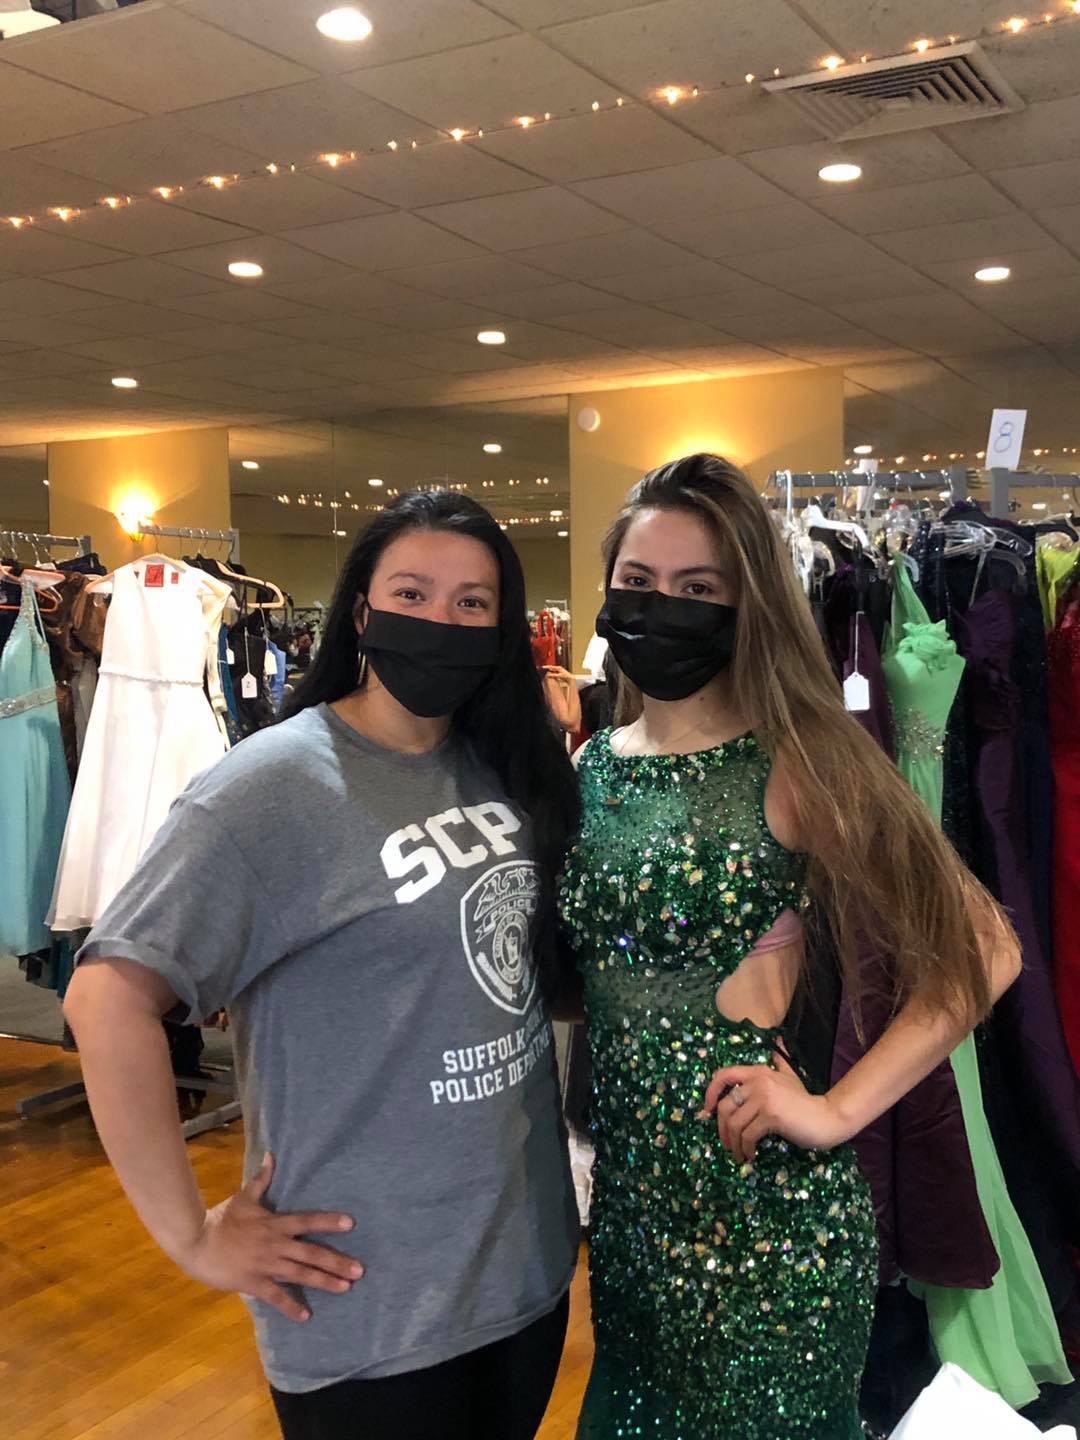 This weekend free formal wear available to high school students